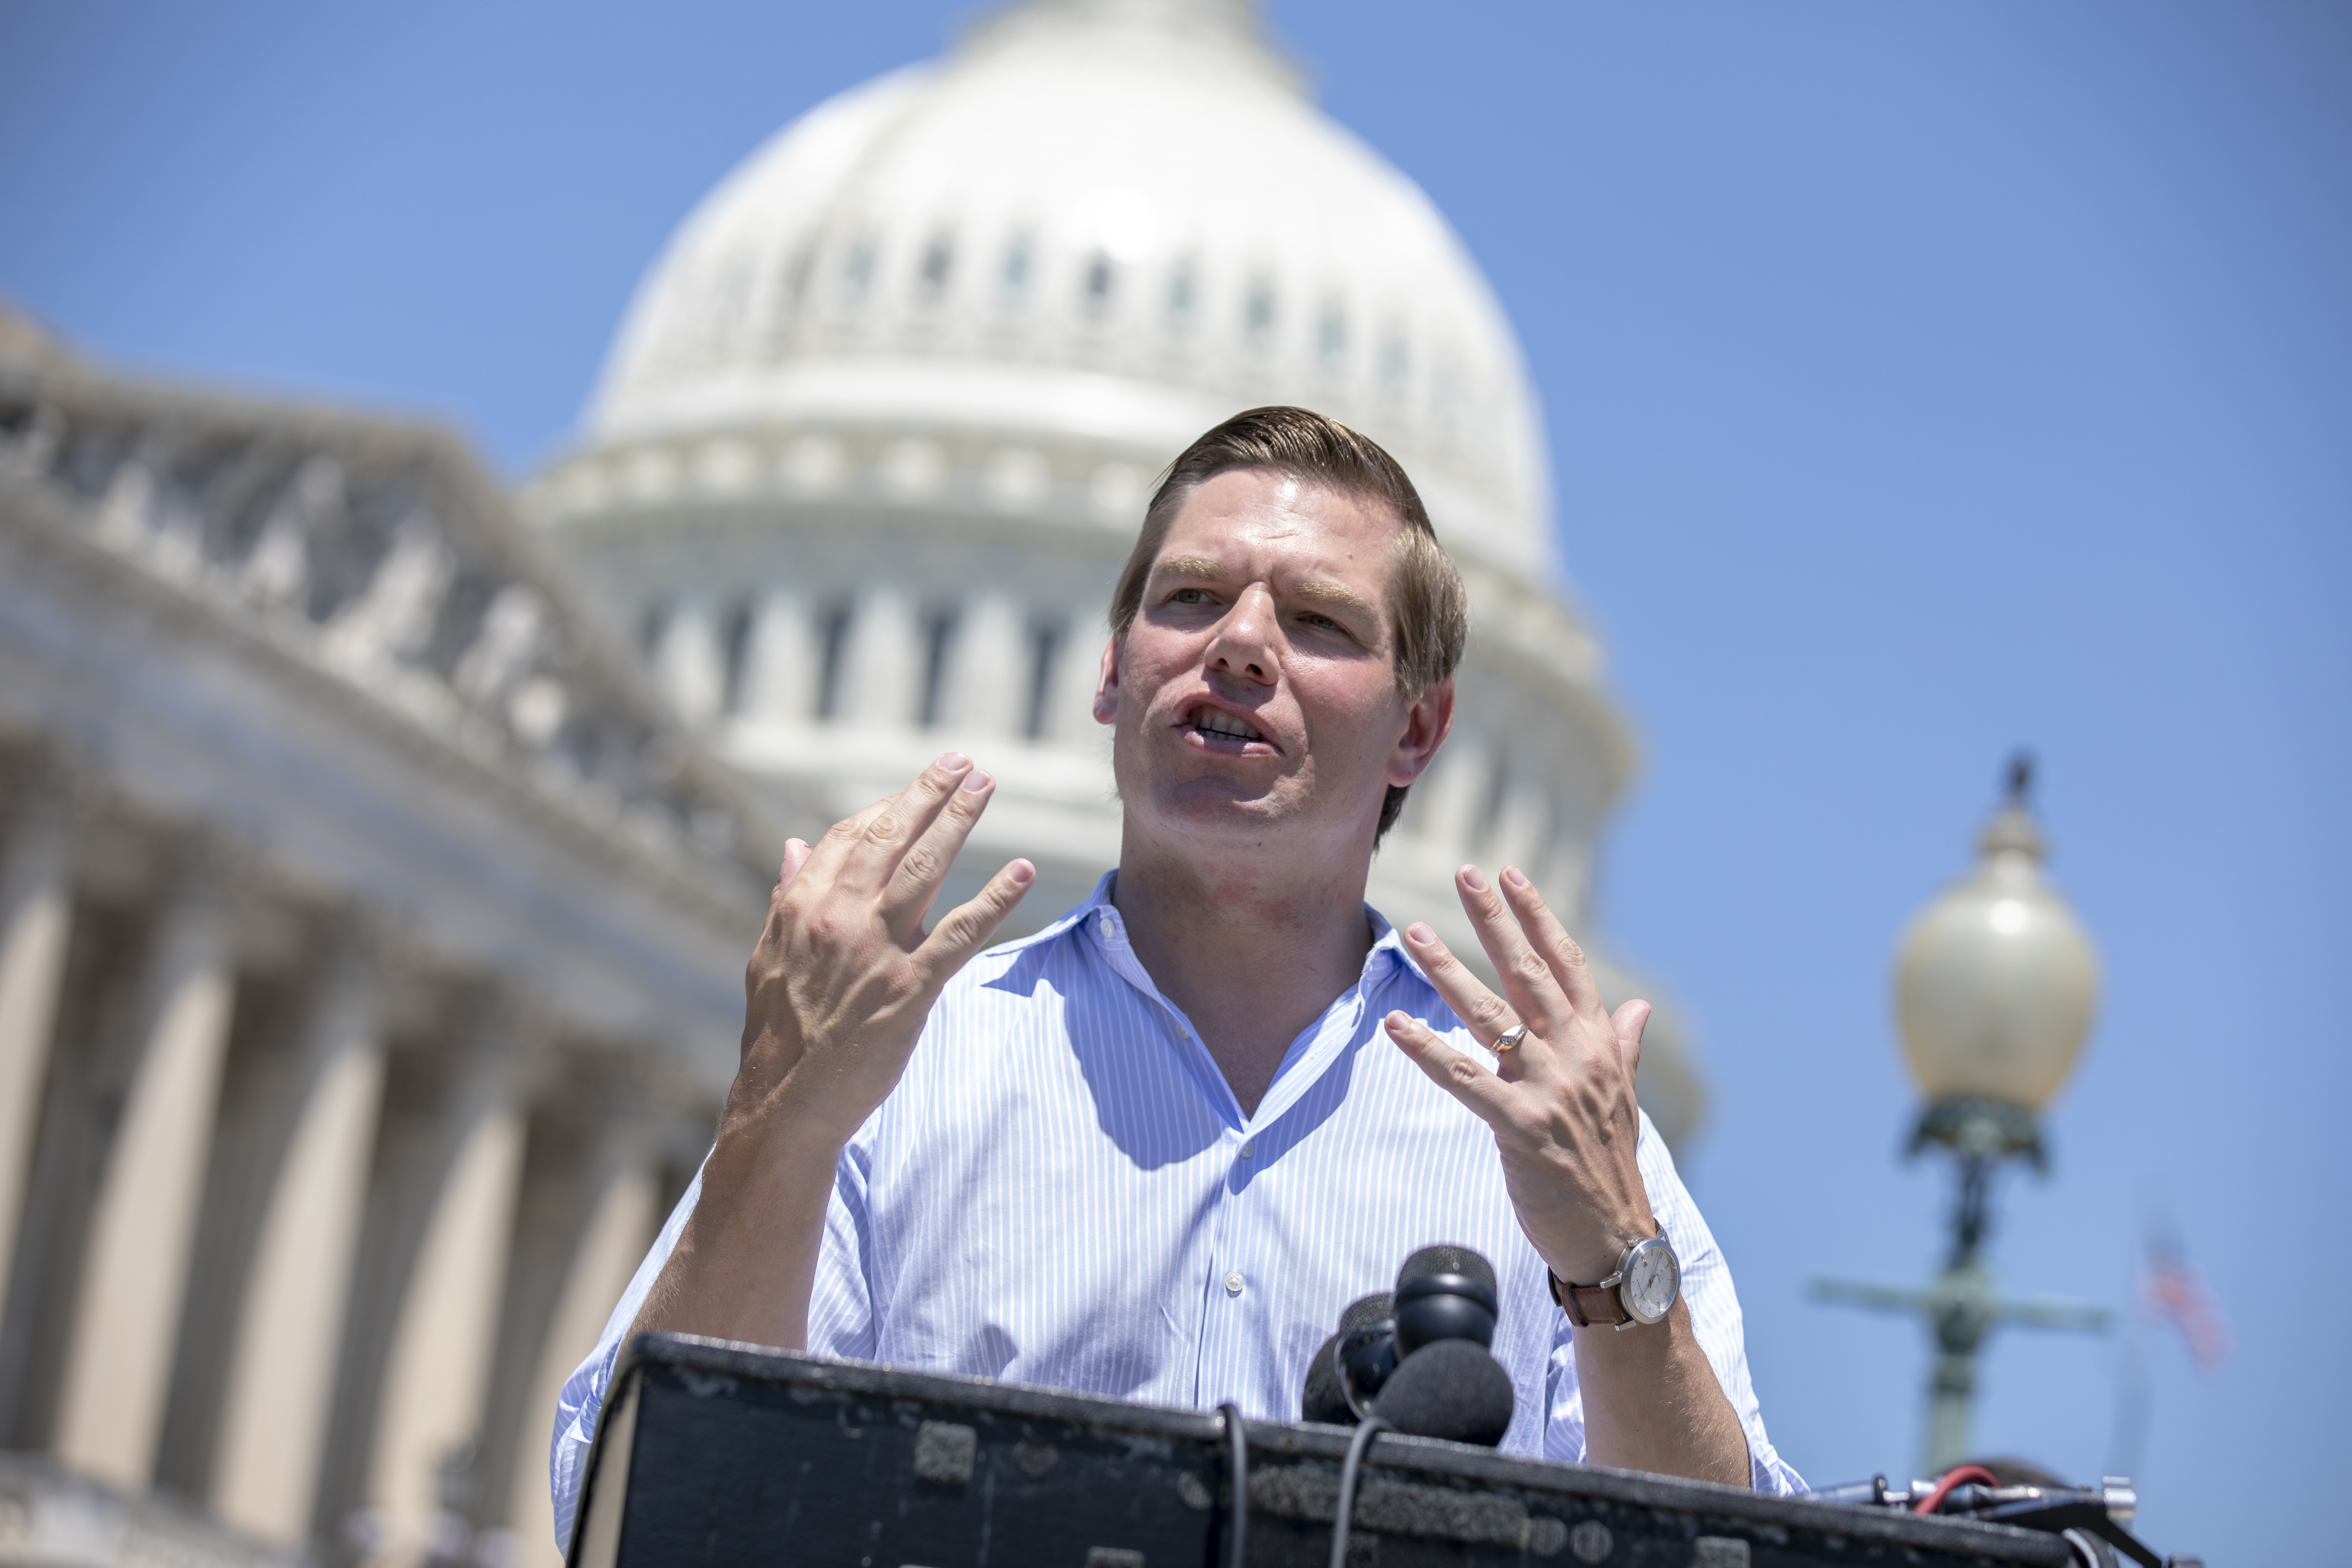 WASHINGTON, DC - JULY 10: Rep. Eric Swalwell (D-CA) speaks during a news conference regarding the separation of immigrant children at the U.S. Capitol on July 10, 2018 in Washington, DC. A court order issued June 26 set a deadline of July 10 to reunite the roughly 100 young children with their parents. (Photo by Alex Edelman/Getty Images)